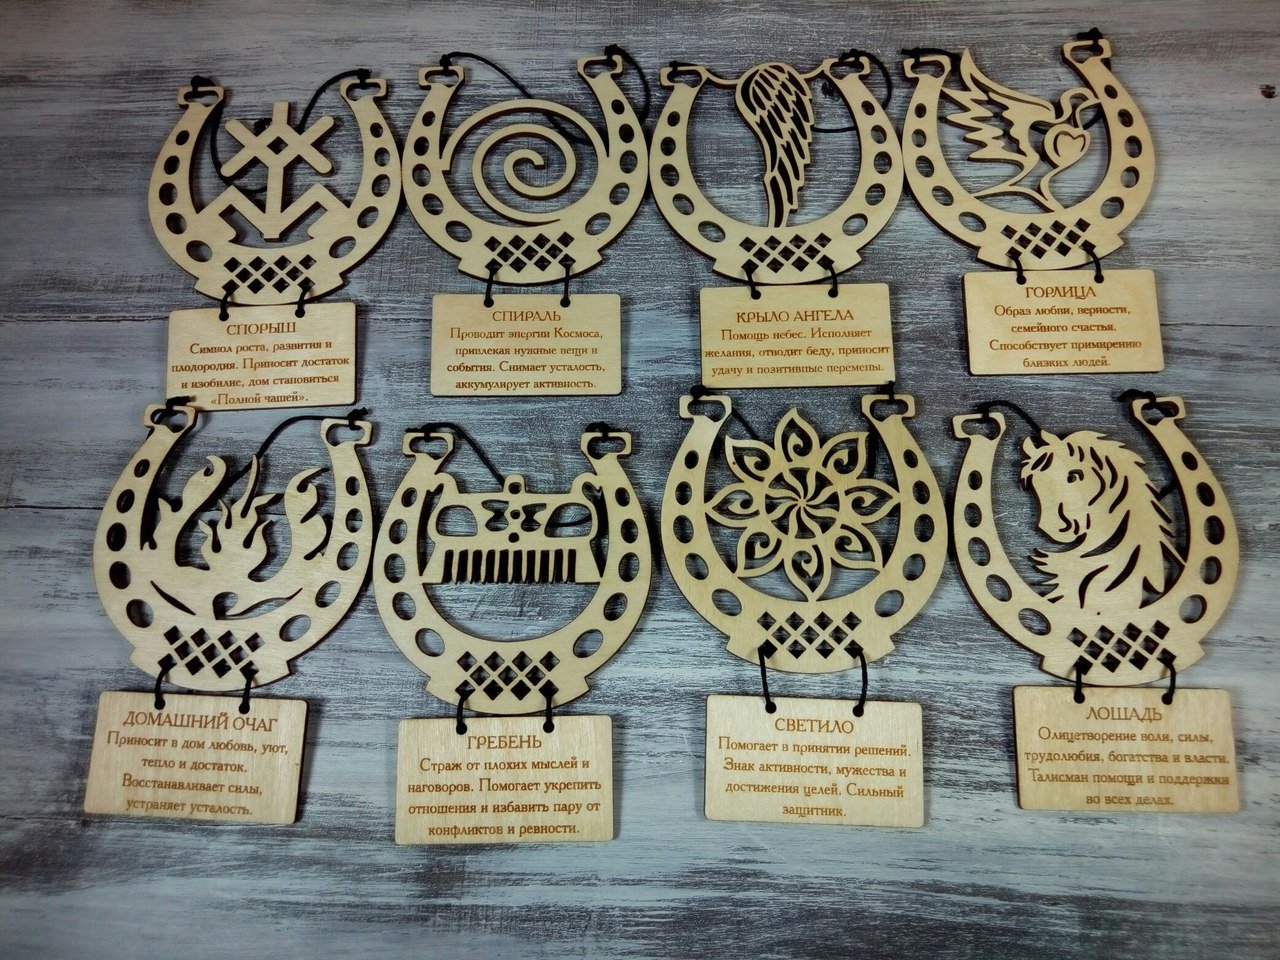 laser cut projects made of wood